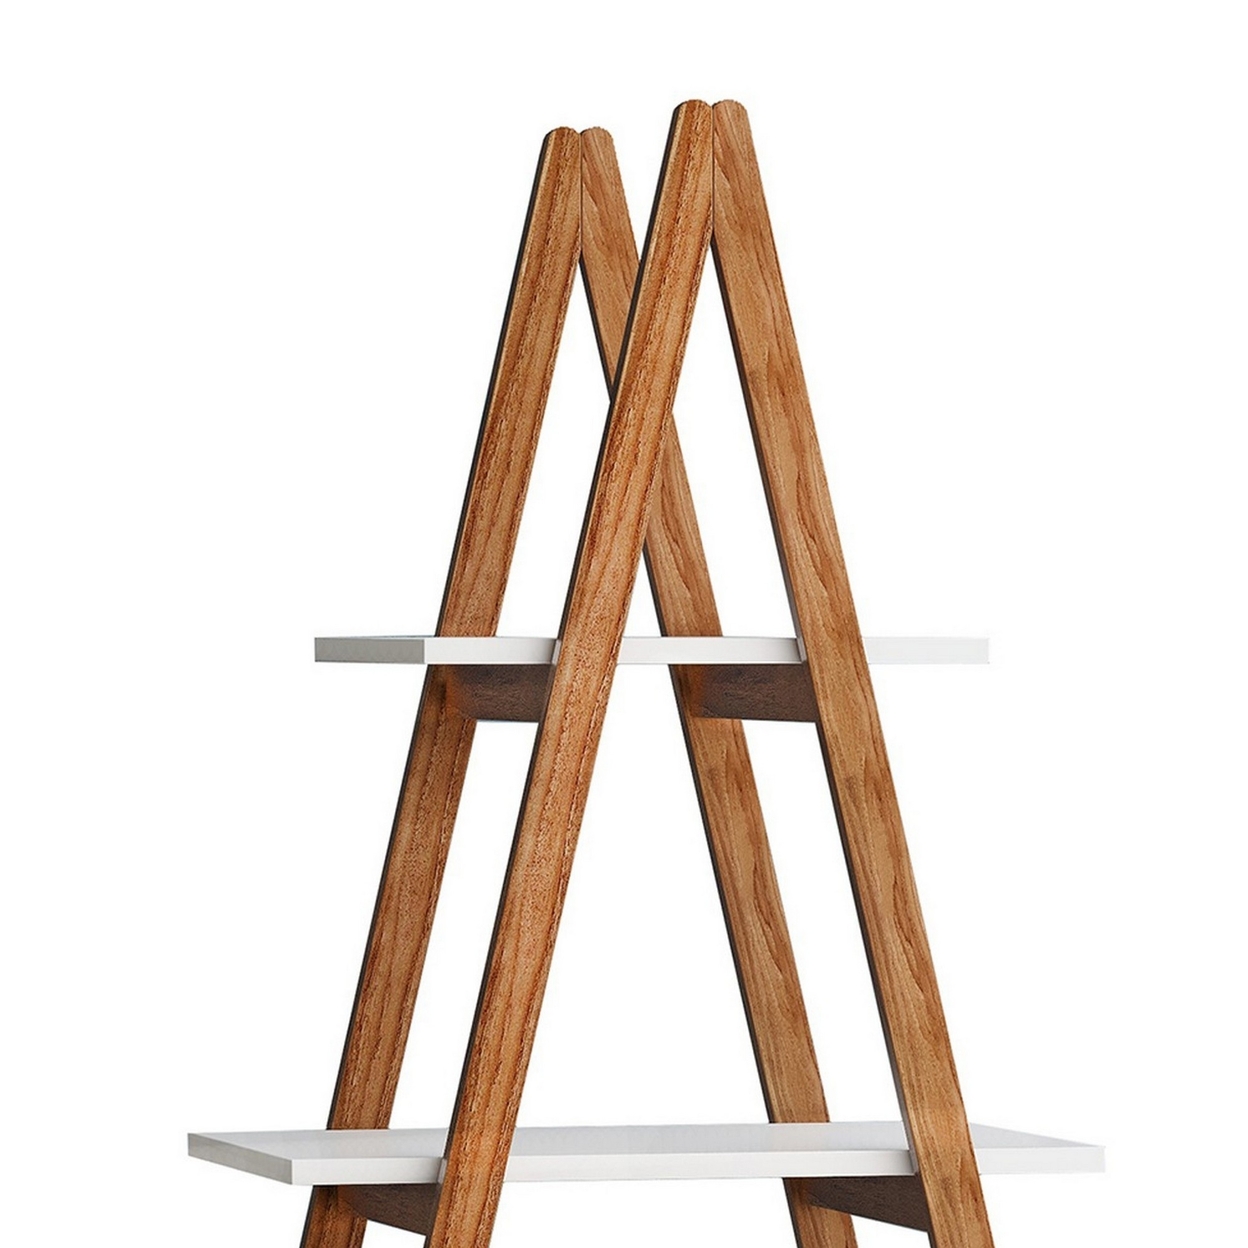 54 Inch A Frame Bookshelf With 4 Shelves, Ladder Style, White And Brown- Saltoro Sherpi